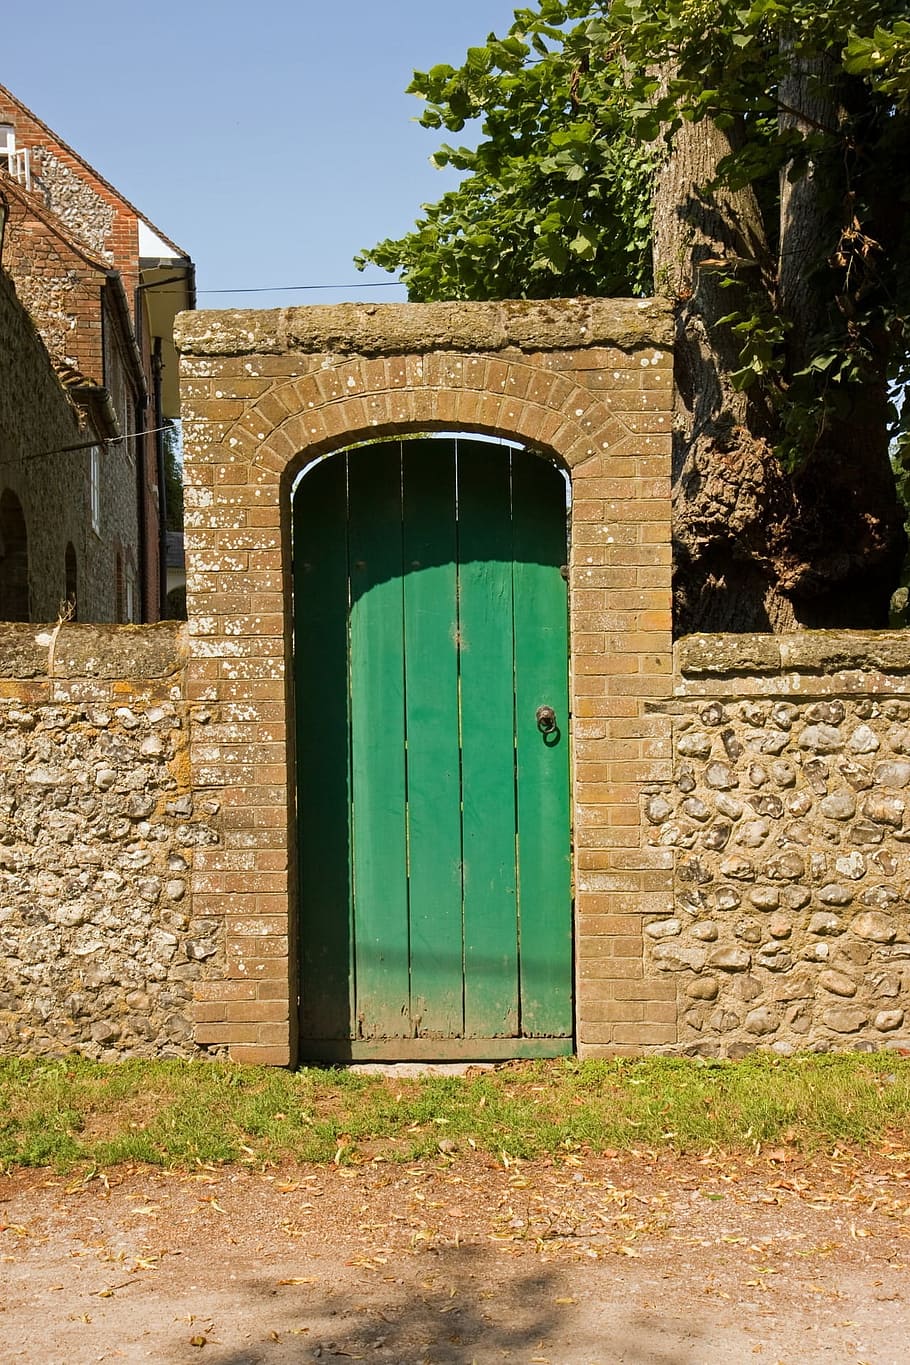 Door, Old, Wood, Wooden, Stone, green, old, wood, wall, countryside, rural